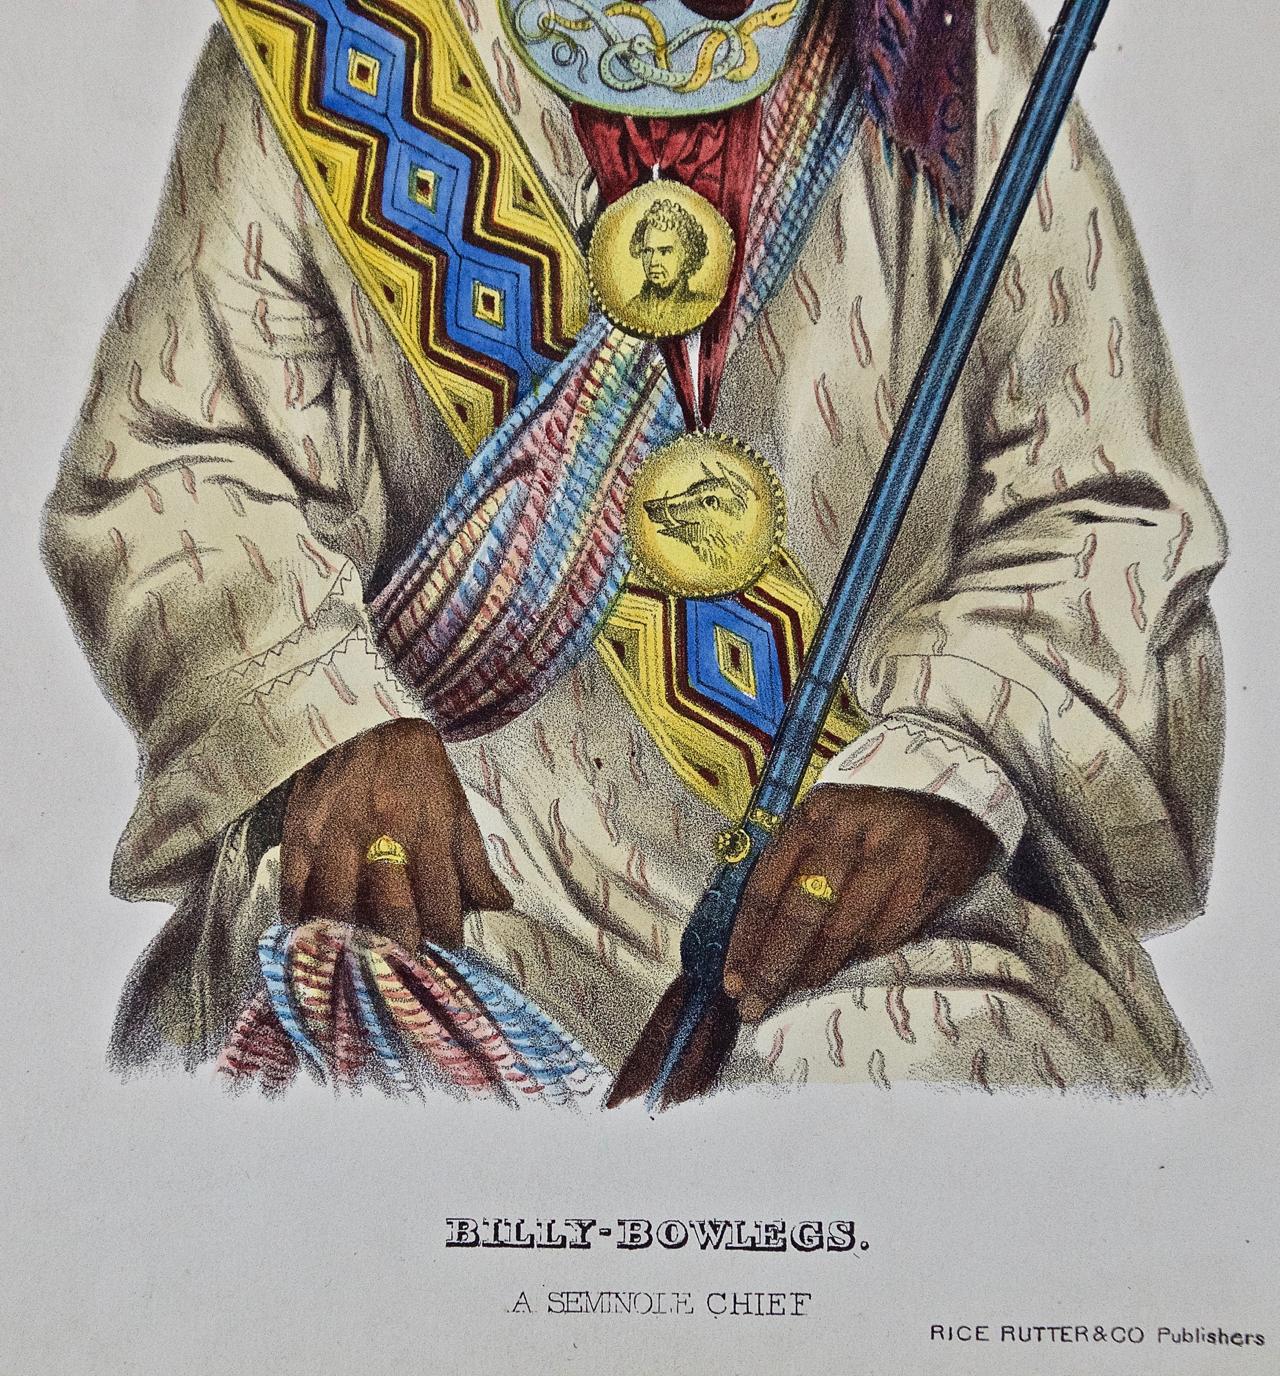 This an original 19th century hand-colored McKenney and Hall lithographic portrait of a Native American entitled 